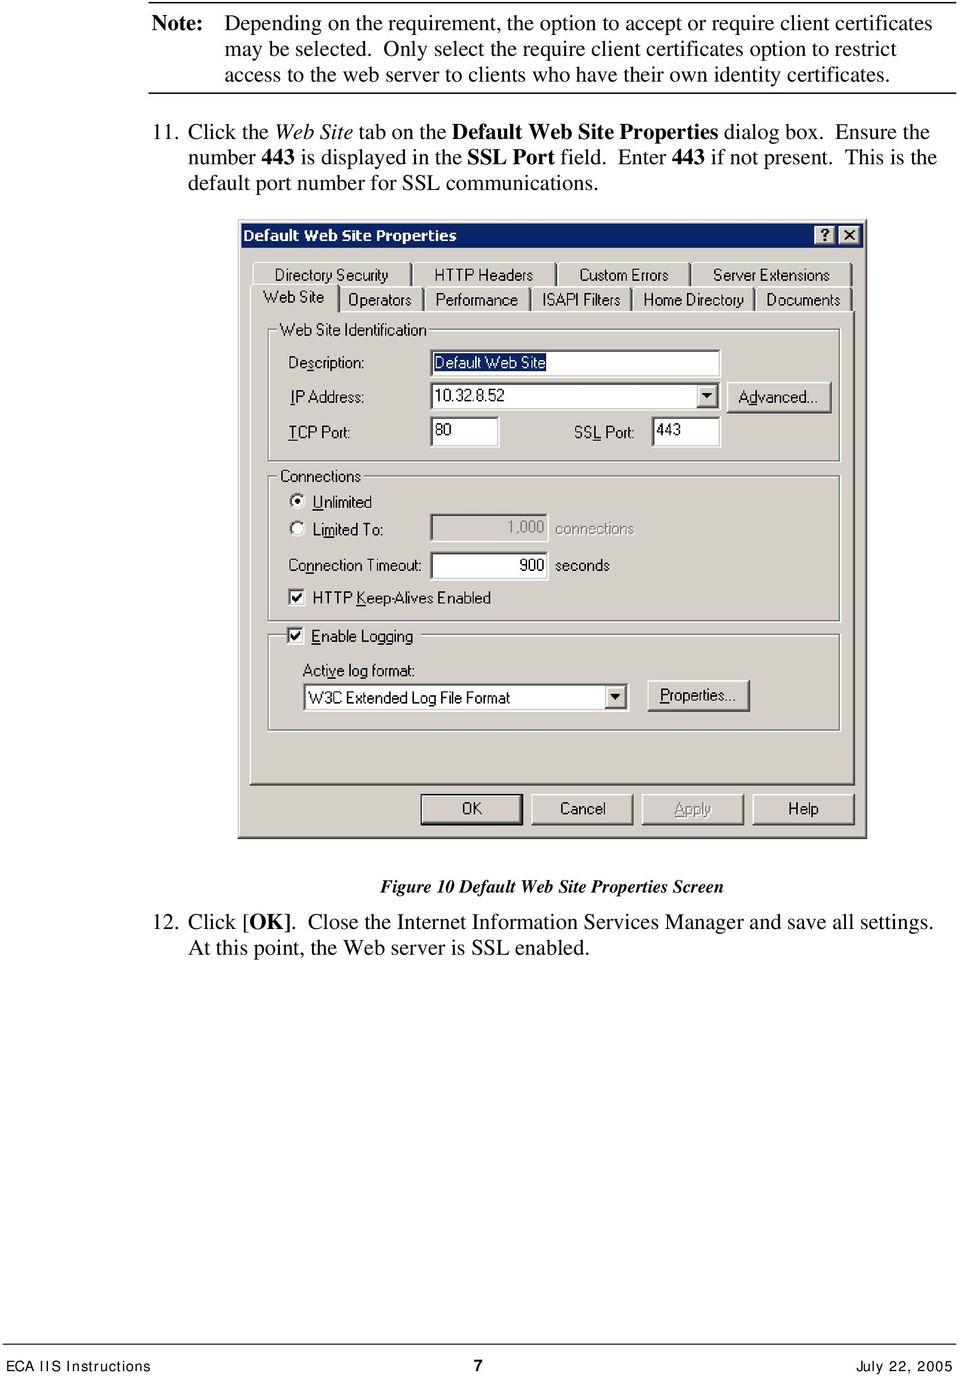 Click the Web Site tab on the Default Web Site Properties dialog box. Ensure the number 443 is displayed in the SSL Port field. Enter 443 if not present.